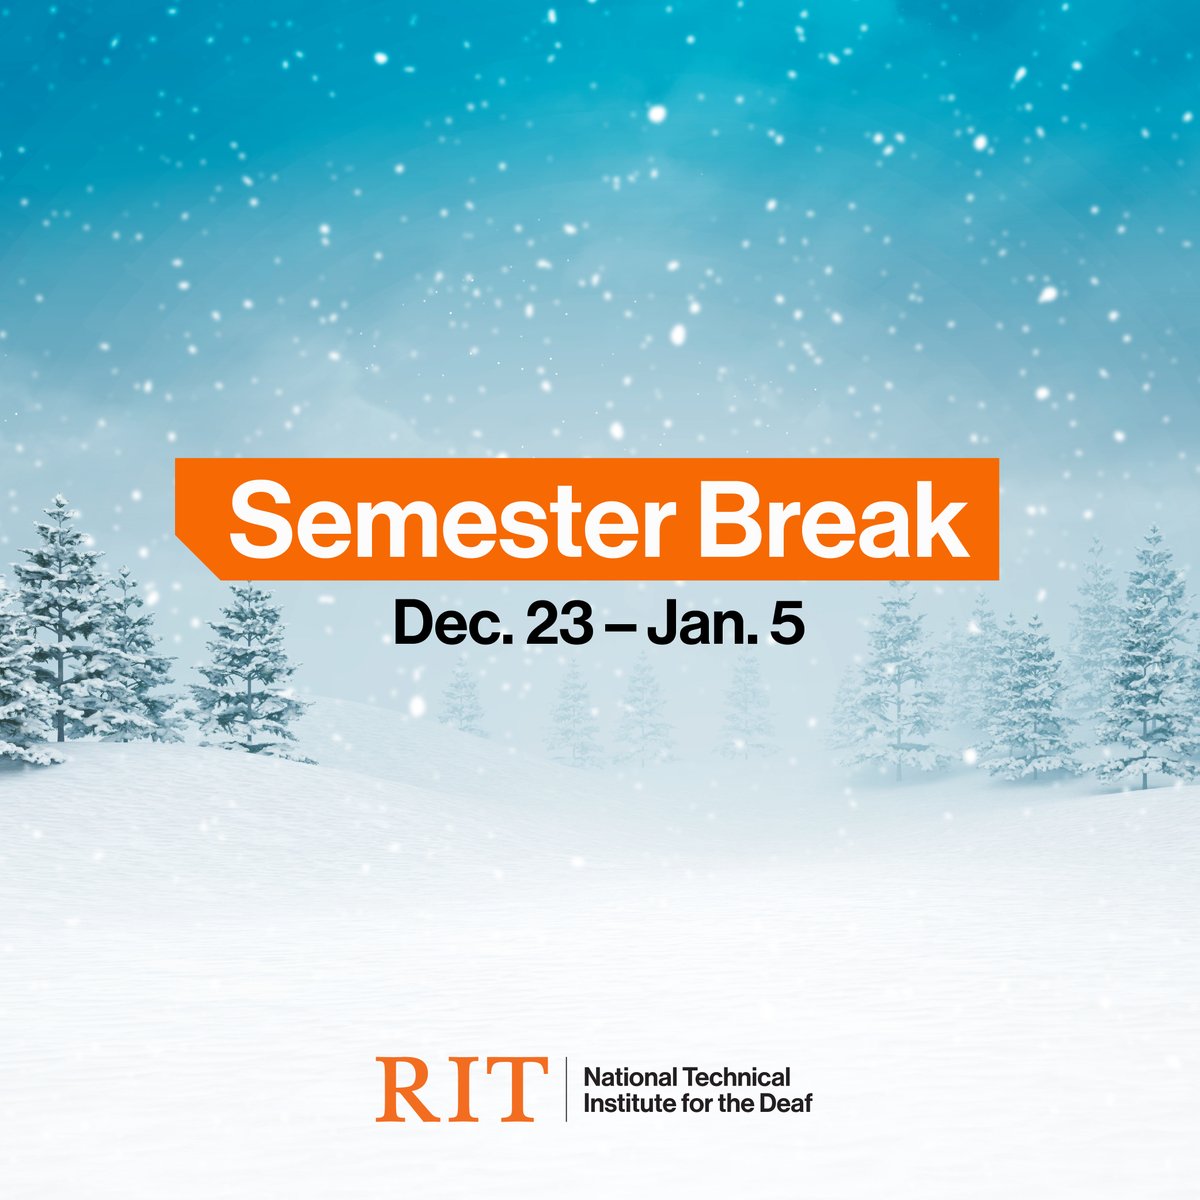 ❄️ Holiday cheer is here! RIT/NTID wishes all our students a joyful and rejuvenating break from December 23rd to January 15th. #HolidayBreak #SeasonsGreetings #RITNTID #RechargeAndRelax